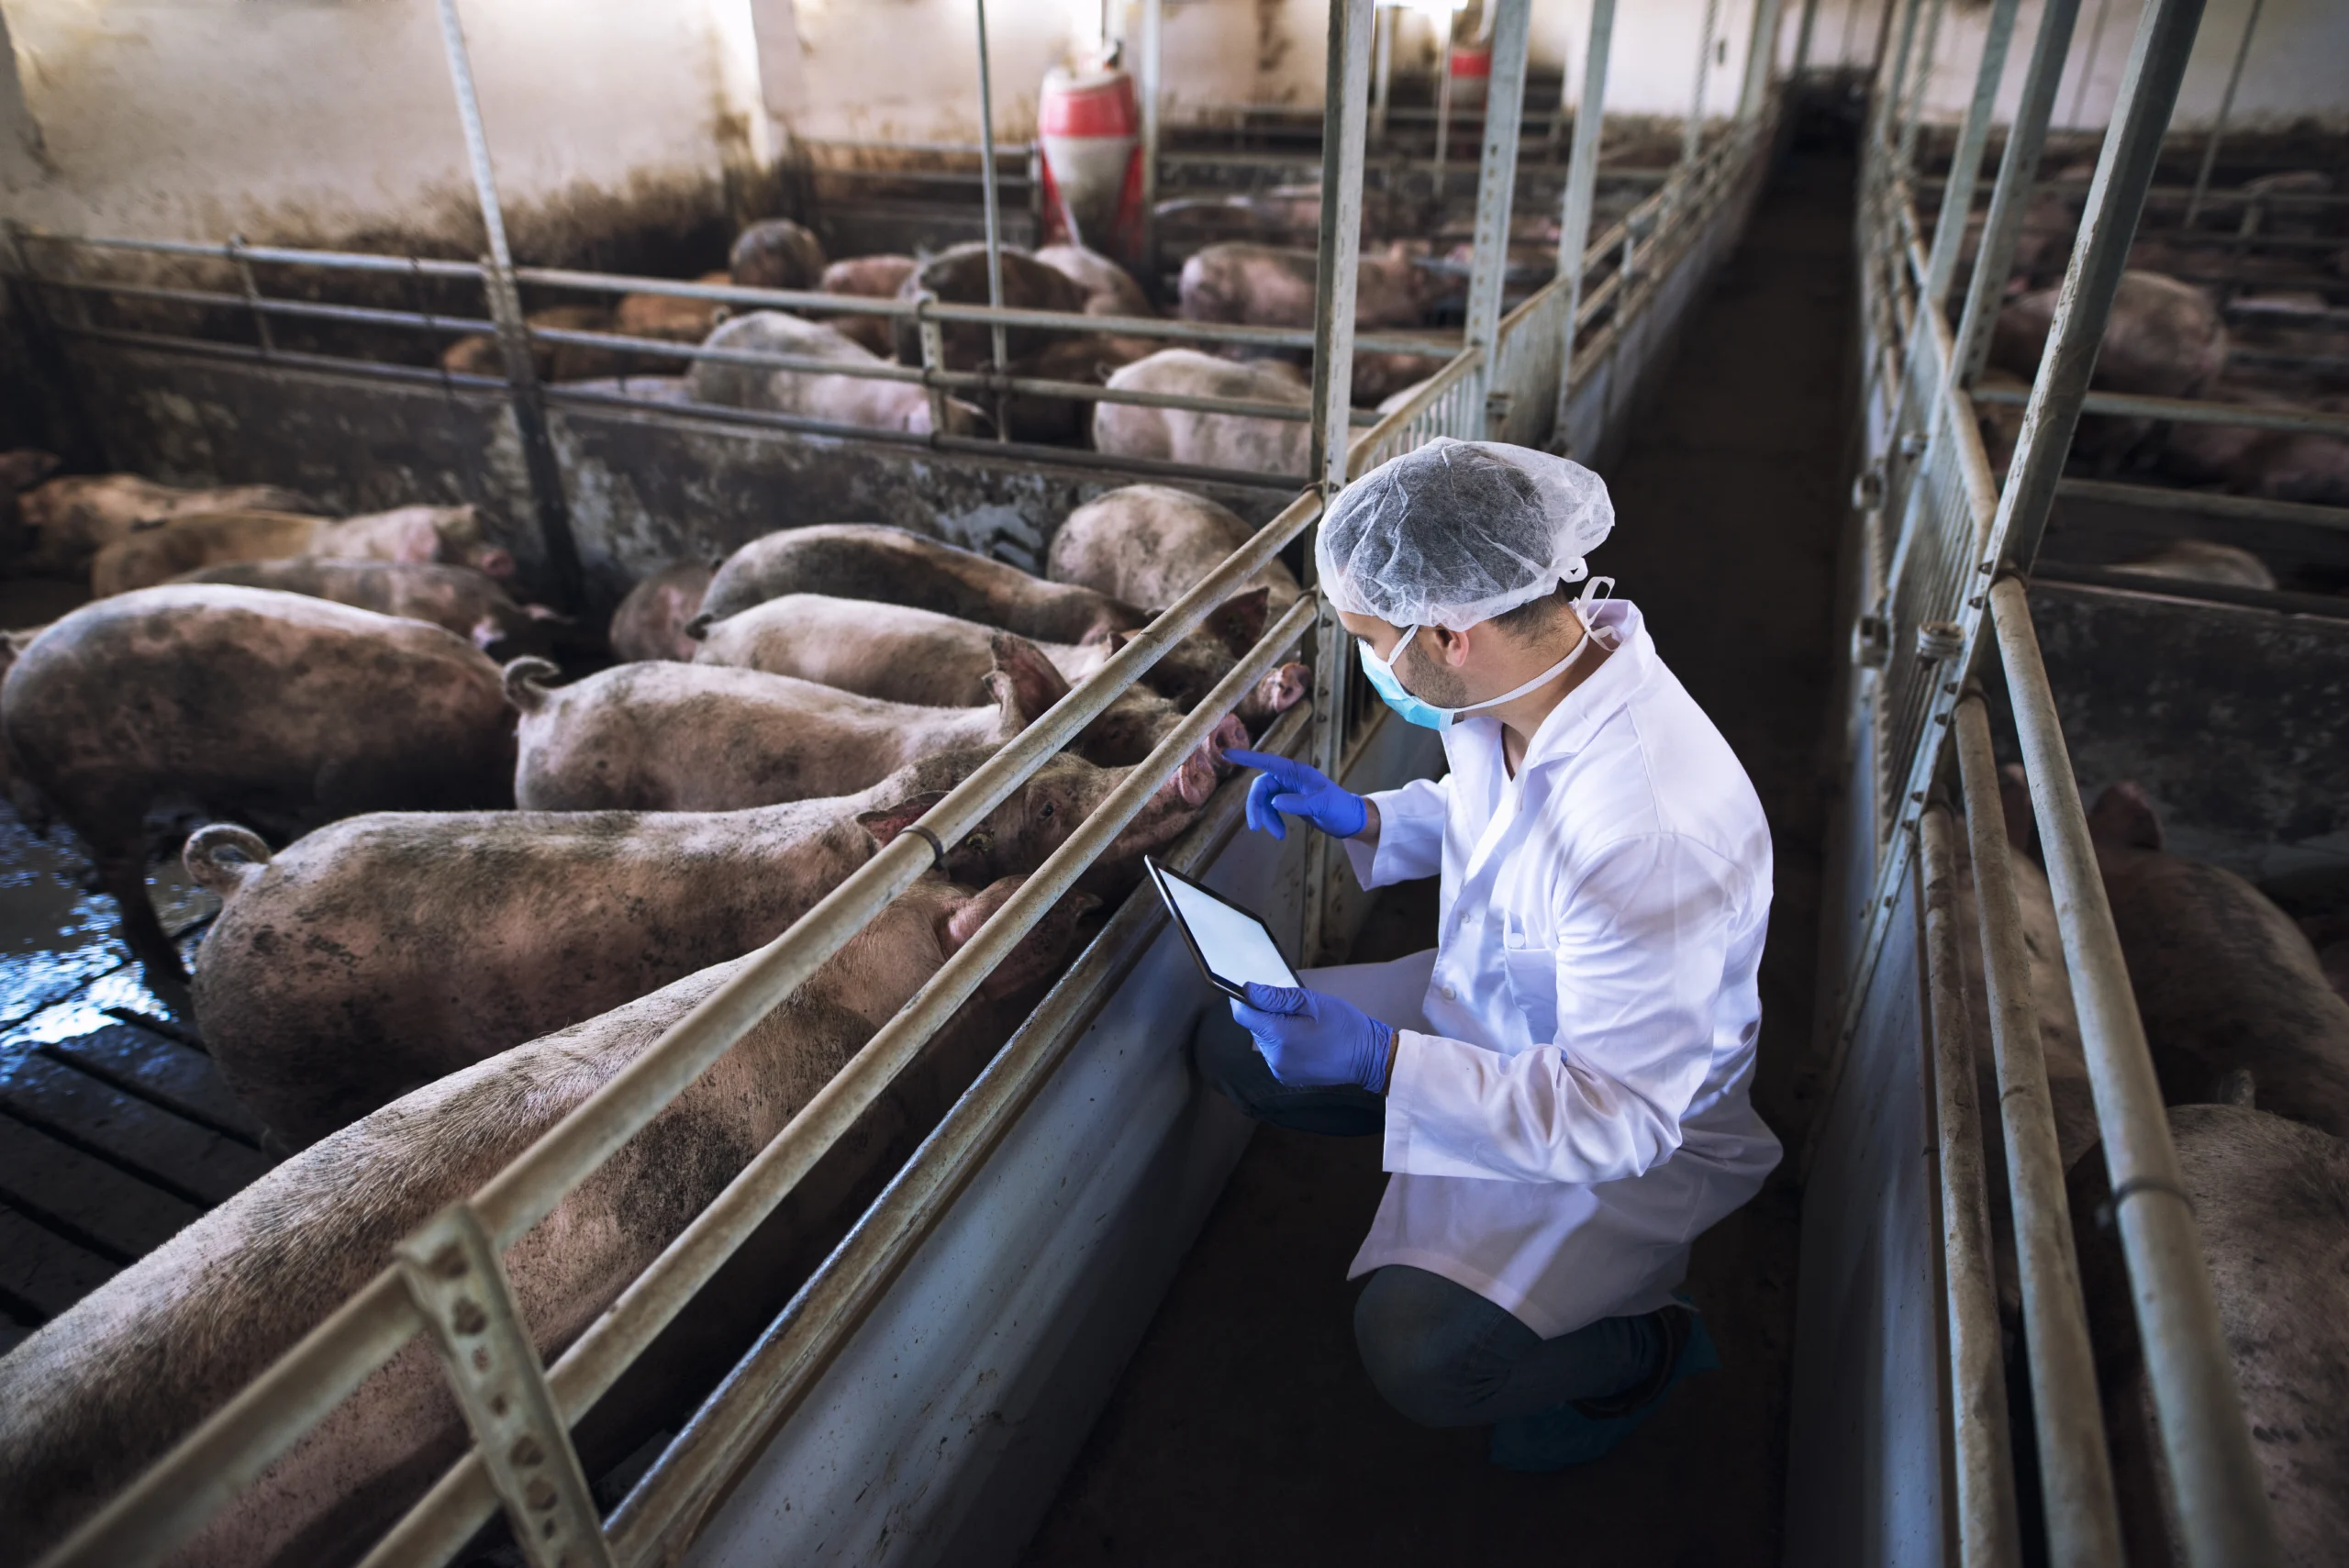 Department of Livestock Development accelerates to upgrade pig farms into the “GFM” system